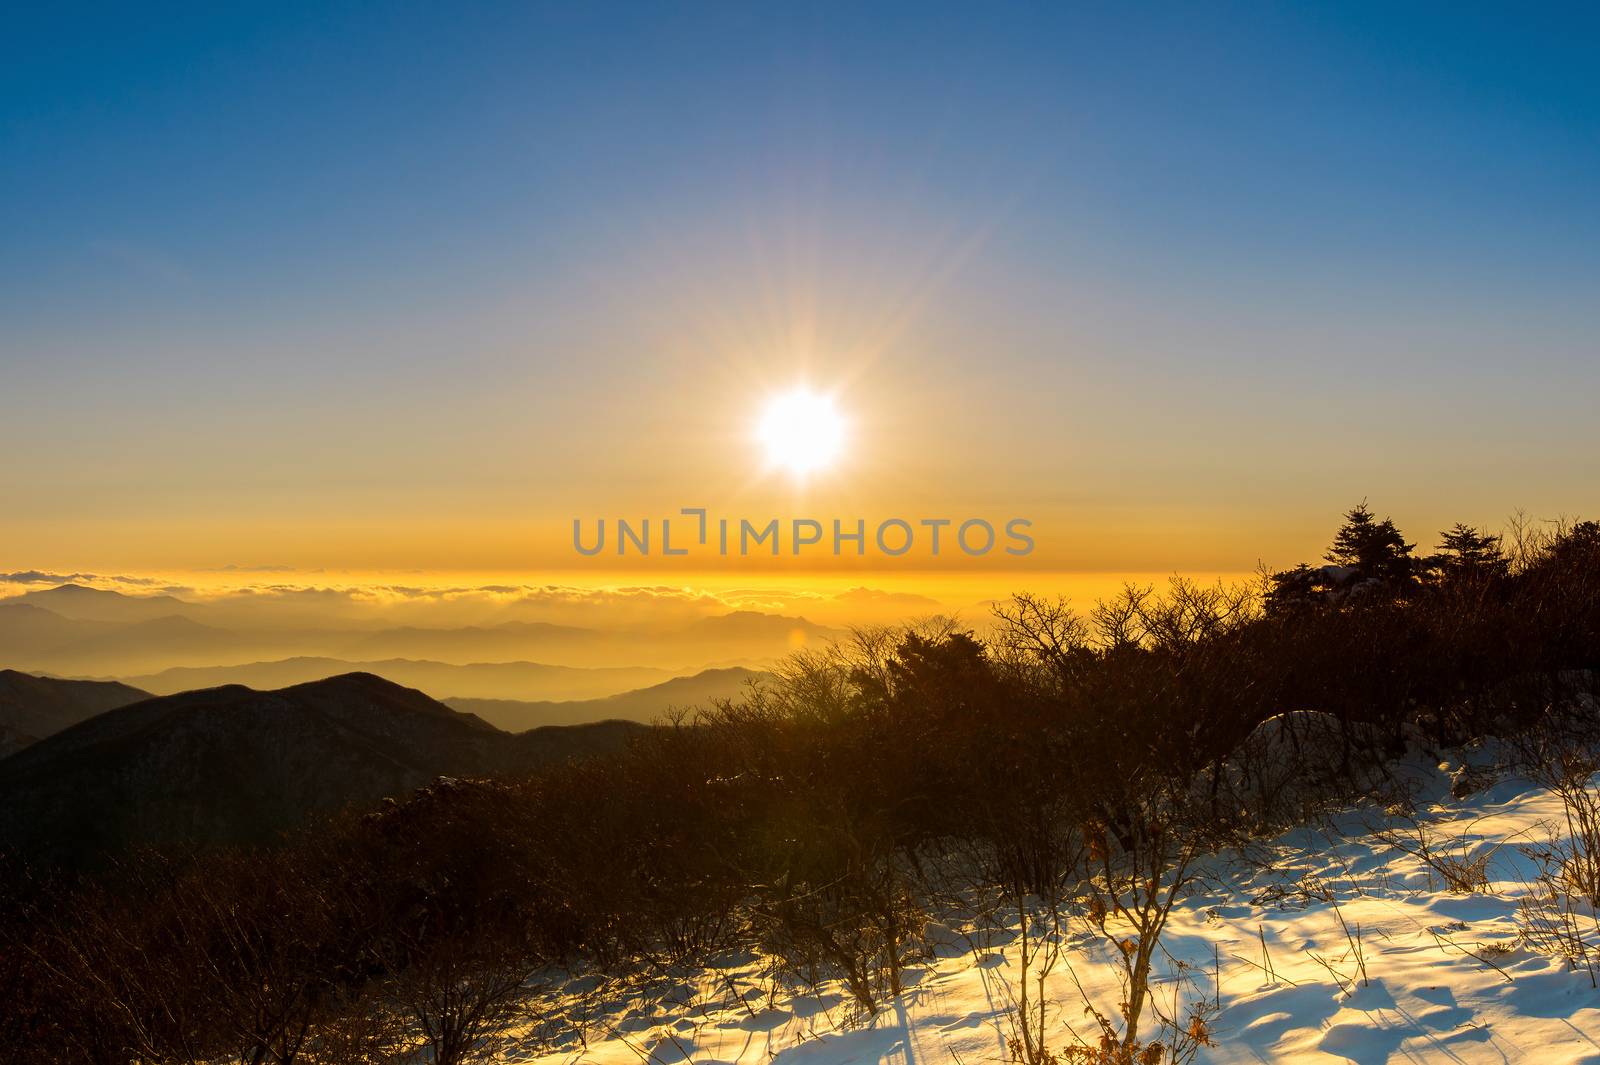 Sunrise with beautiful Lens Flare at Deogyusan mountains in wint by gutarphotoghaphy